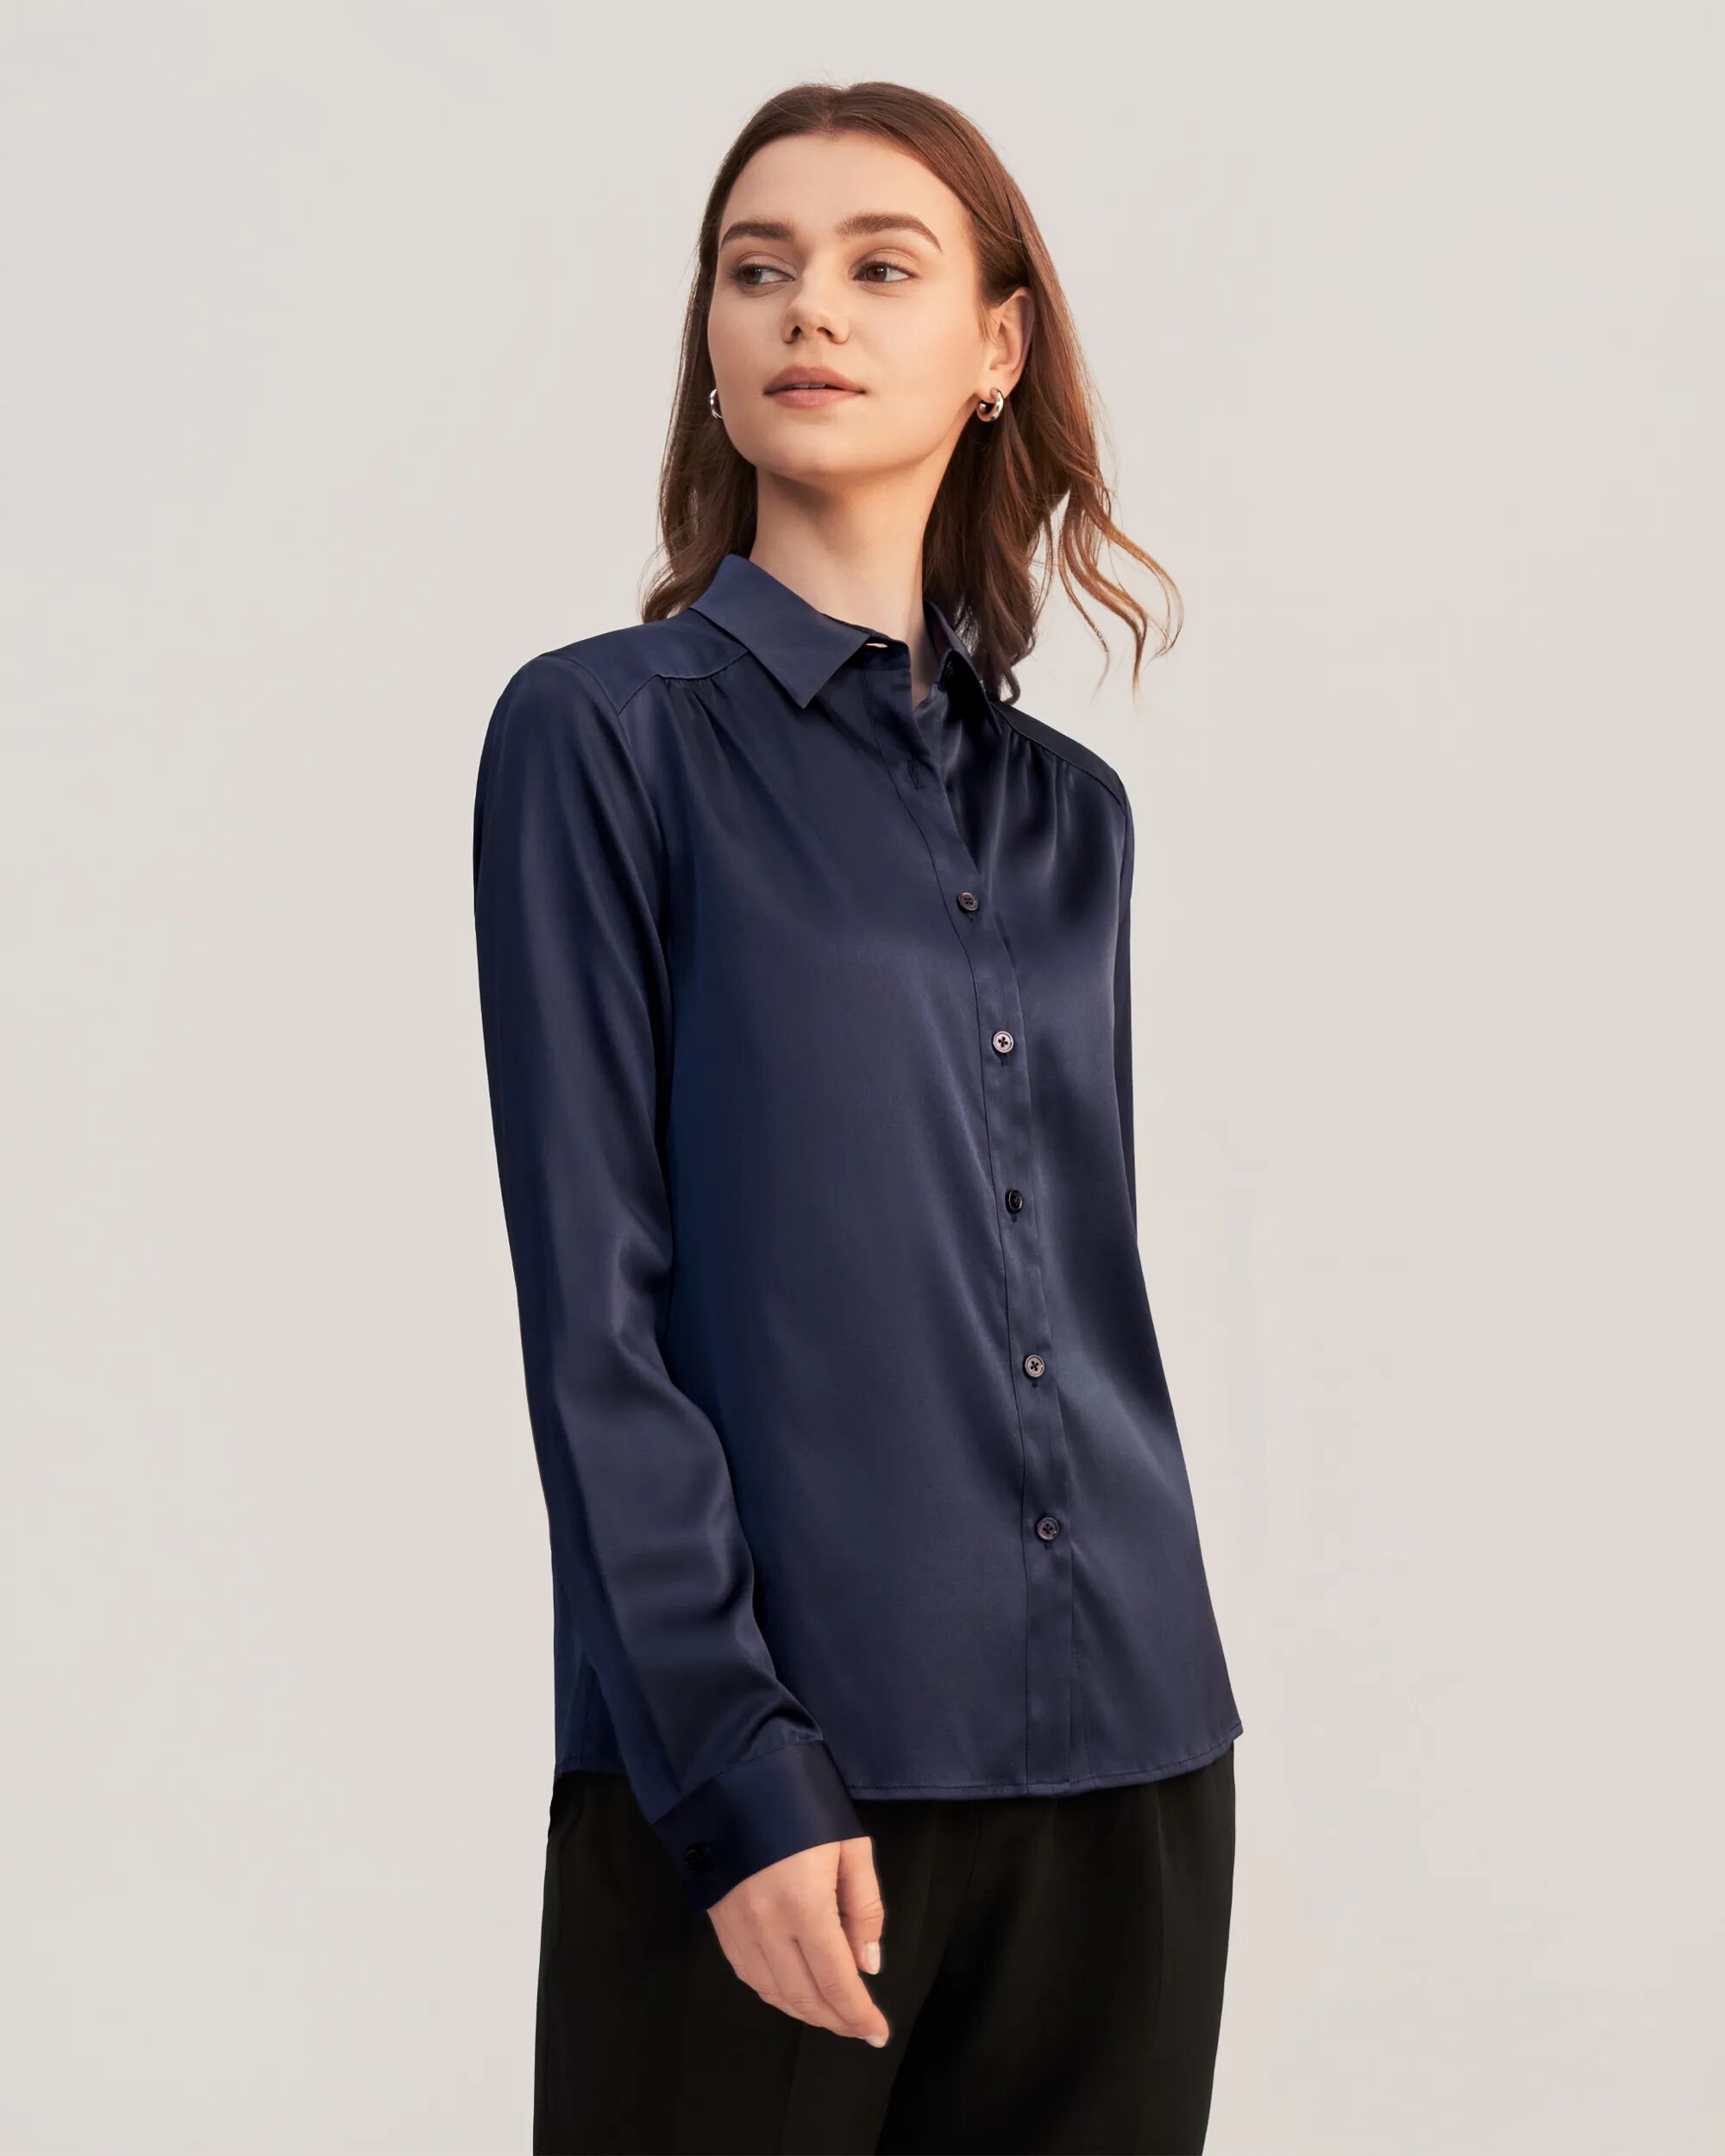 LILYSILK Business Blue Silk Shirt   Button Down Long Sleeves Style   Silk Women Navy 90% Mulberry 19 Momme Curved Hem Skin-Friendly And Breathable L